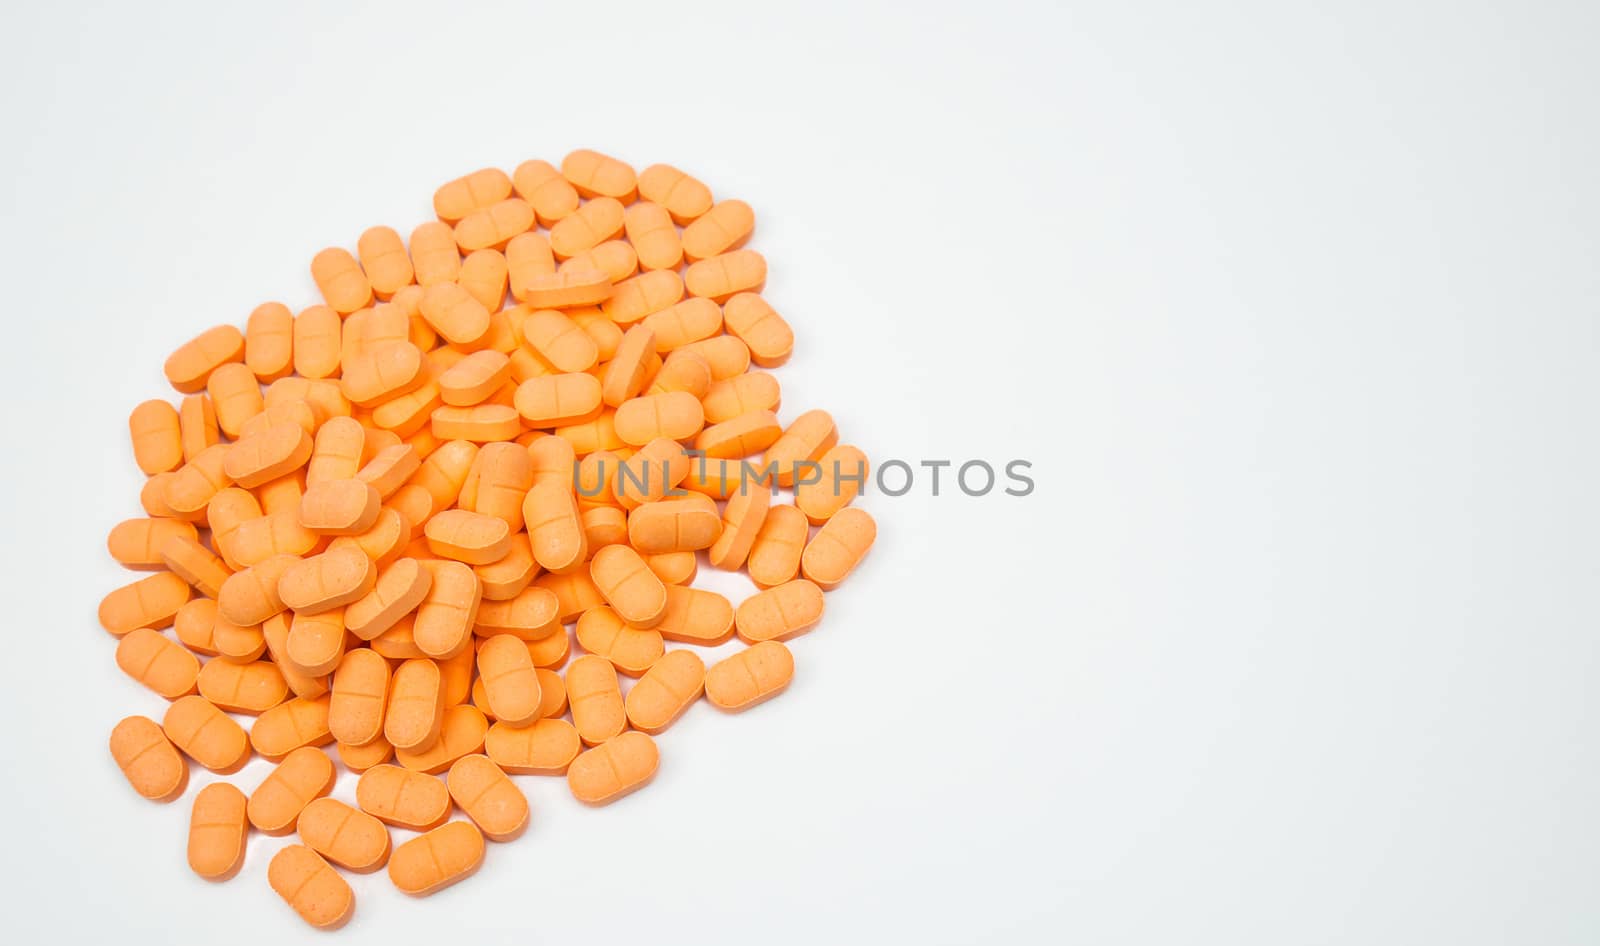 Pile of muscle relaxant, pain relief tablet pills isolated on white background with copy space for text. Pharmaceutical industry production. Pharmacy background. Orange tablets pill.